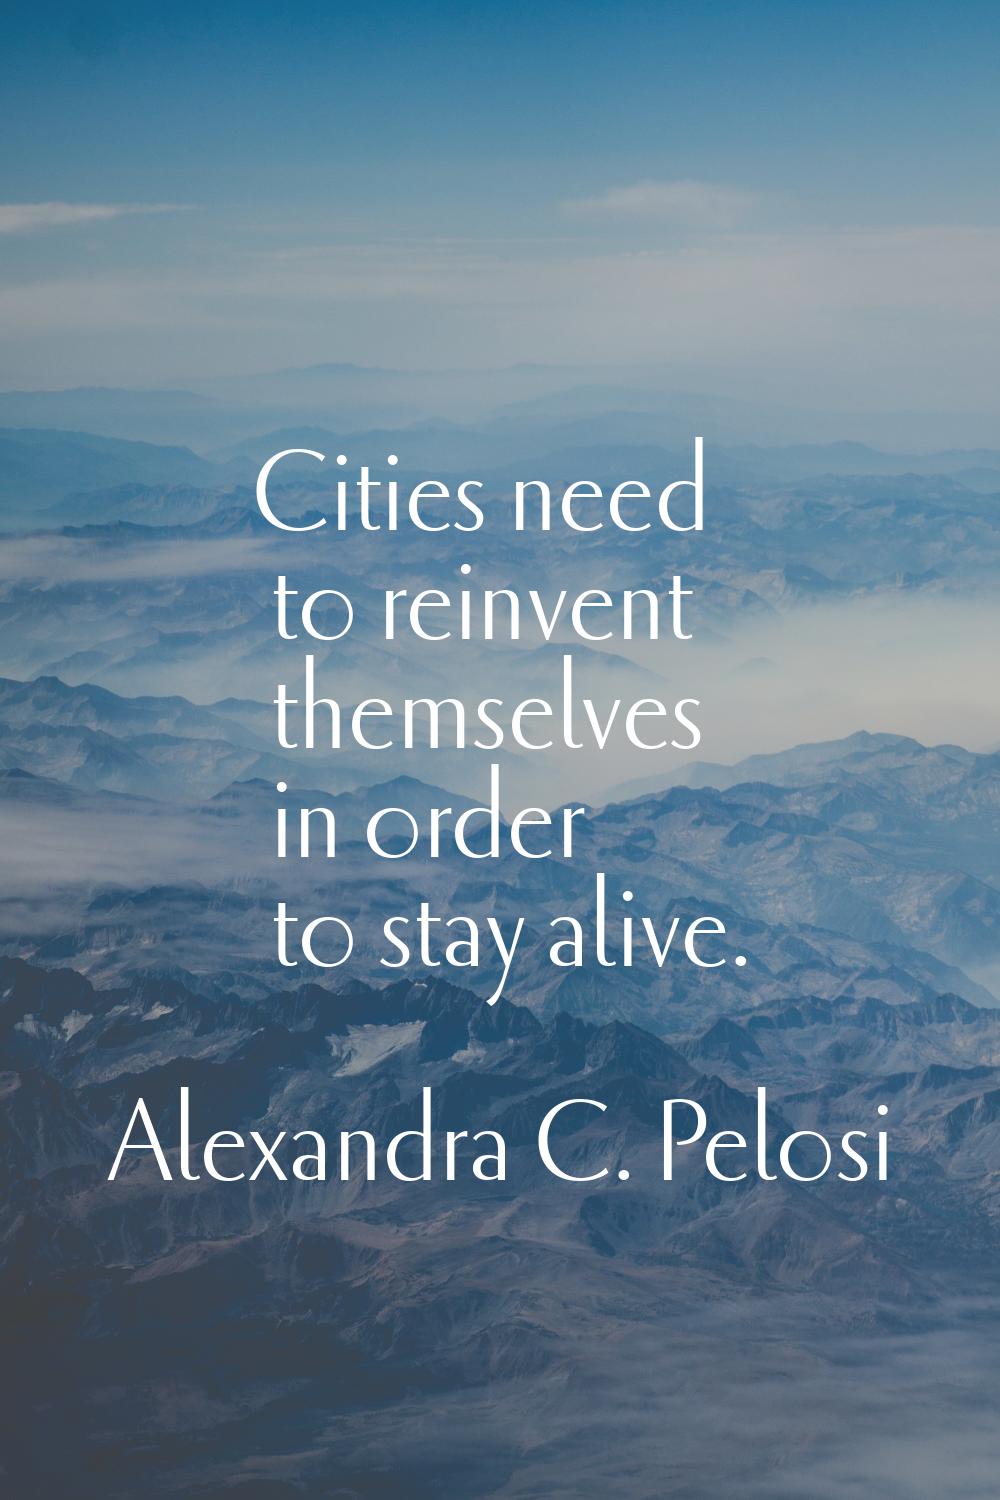 Cities need to reinvent themselves in order to stay alive.